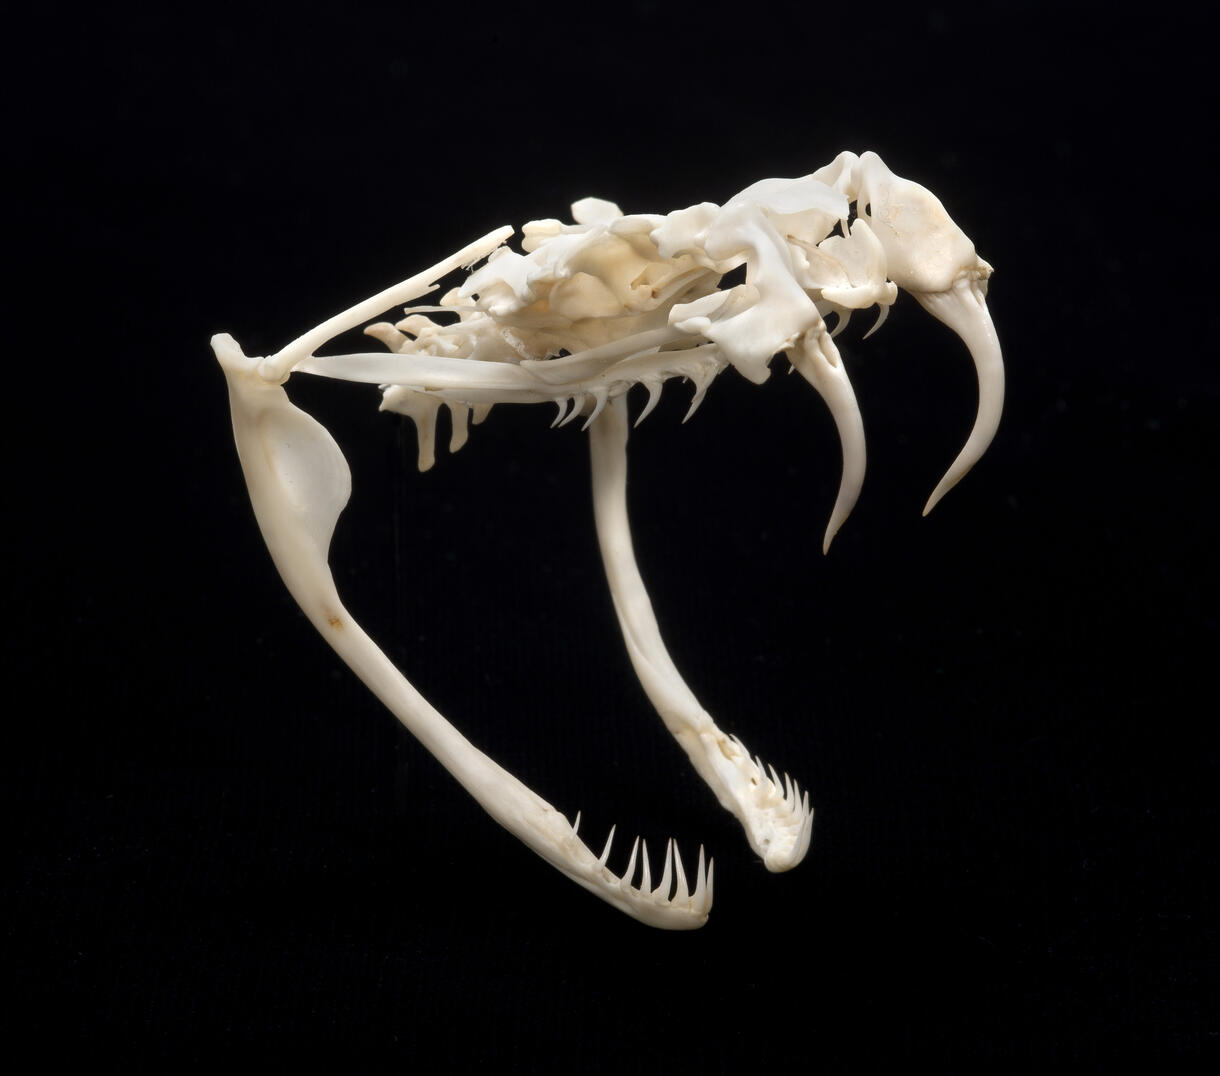 A skull of a Crotalus adamanteus, known as the eastern diamondback rattlesnake, posed open, shows its large curved fangs.